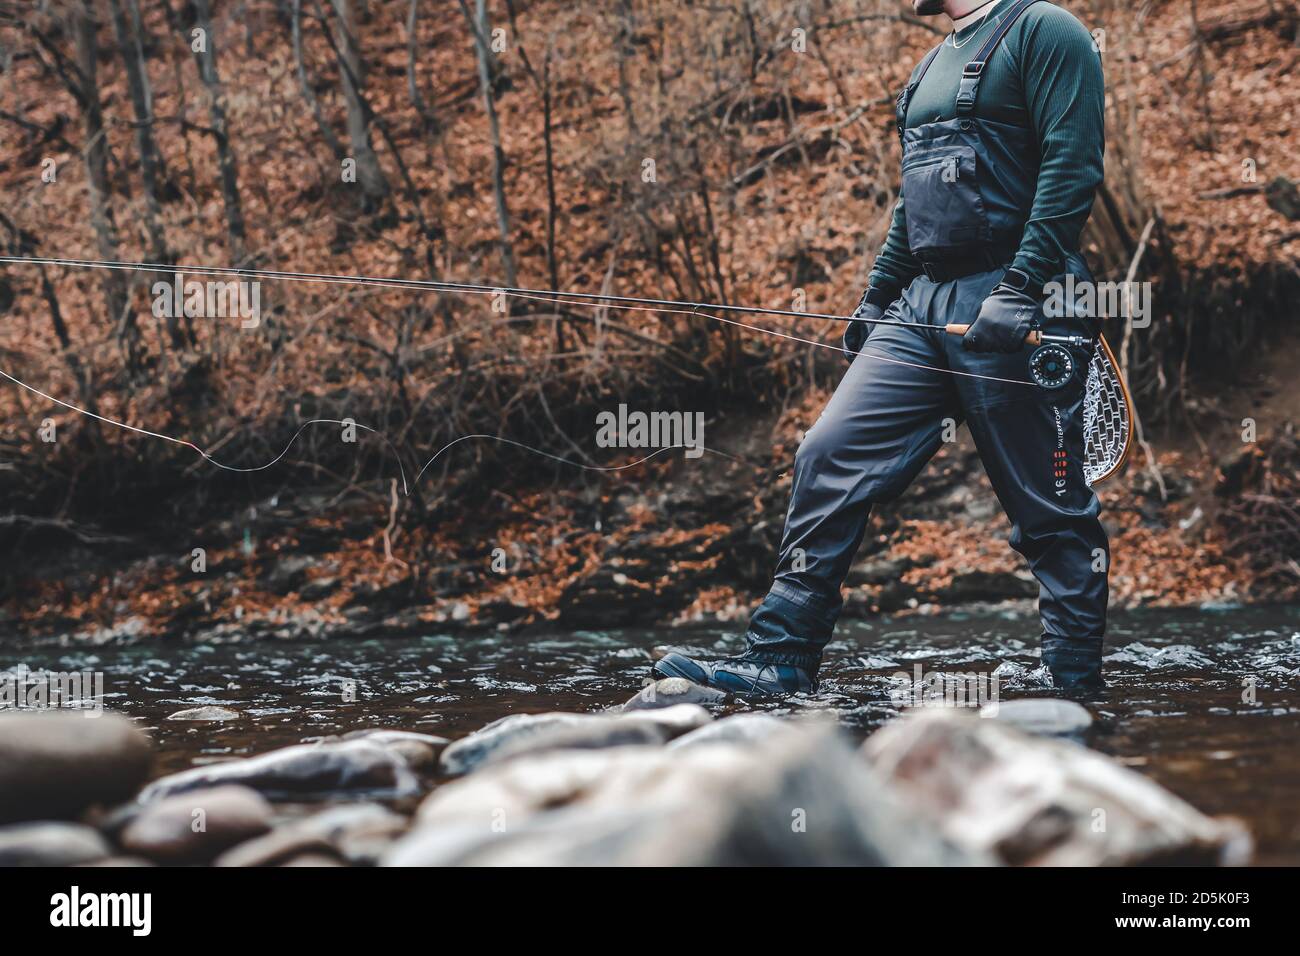 Fisherman fly fishing in river with rod, reel and landing net. Stock Photo